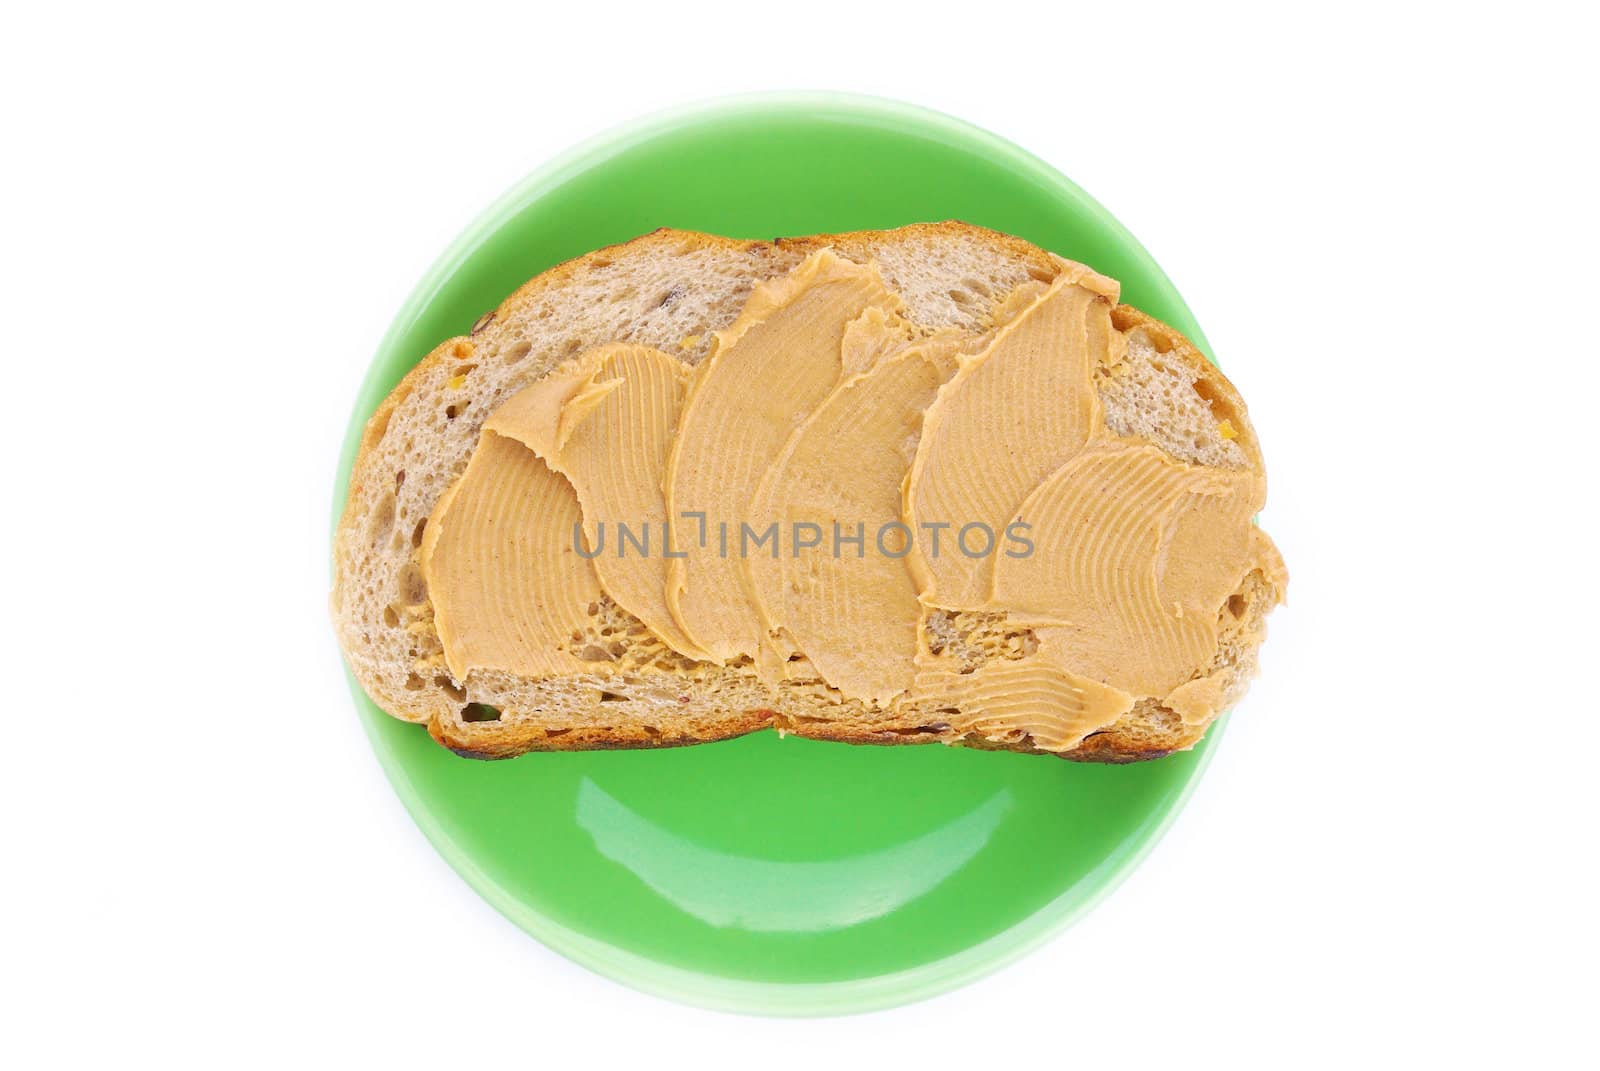 Peanut butter and whole grain , whole wheat bread by teen00000